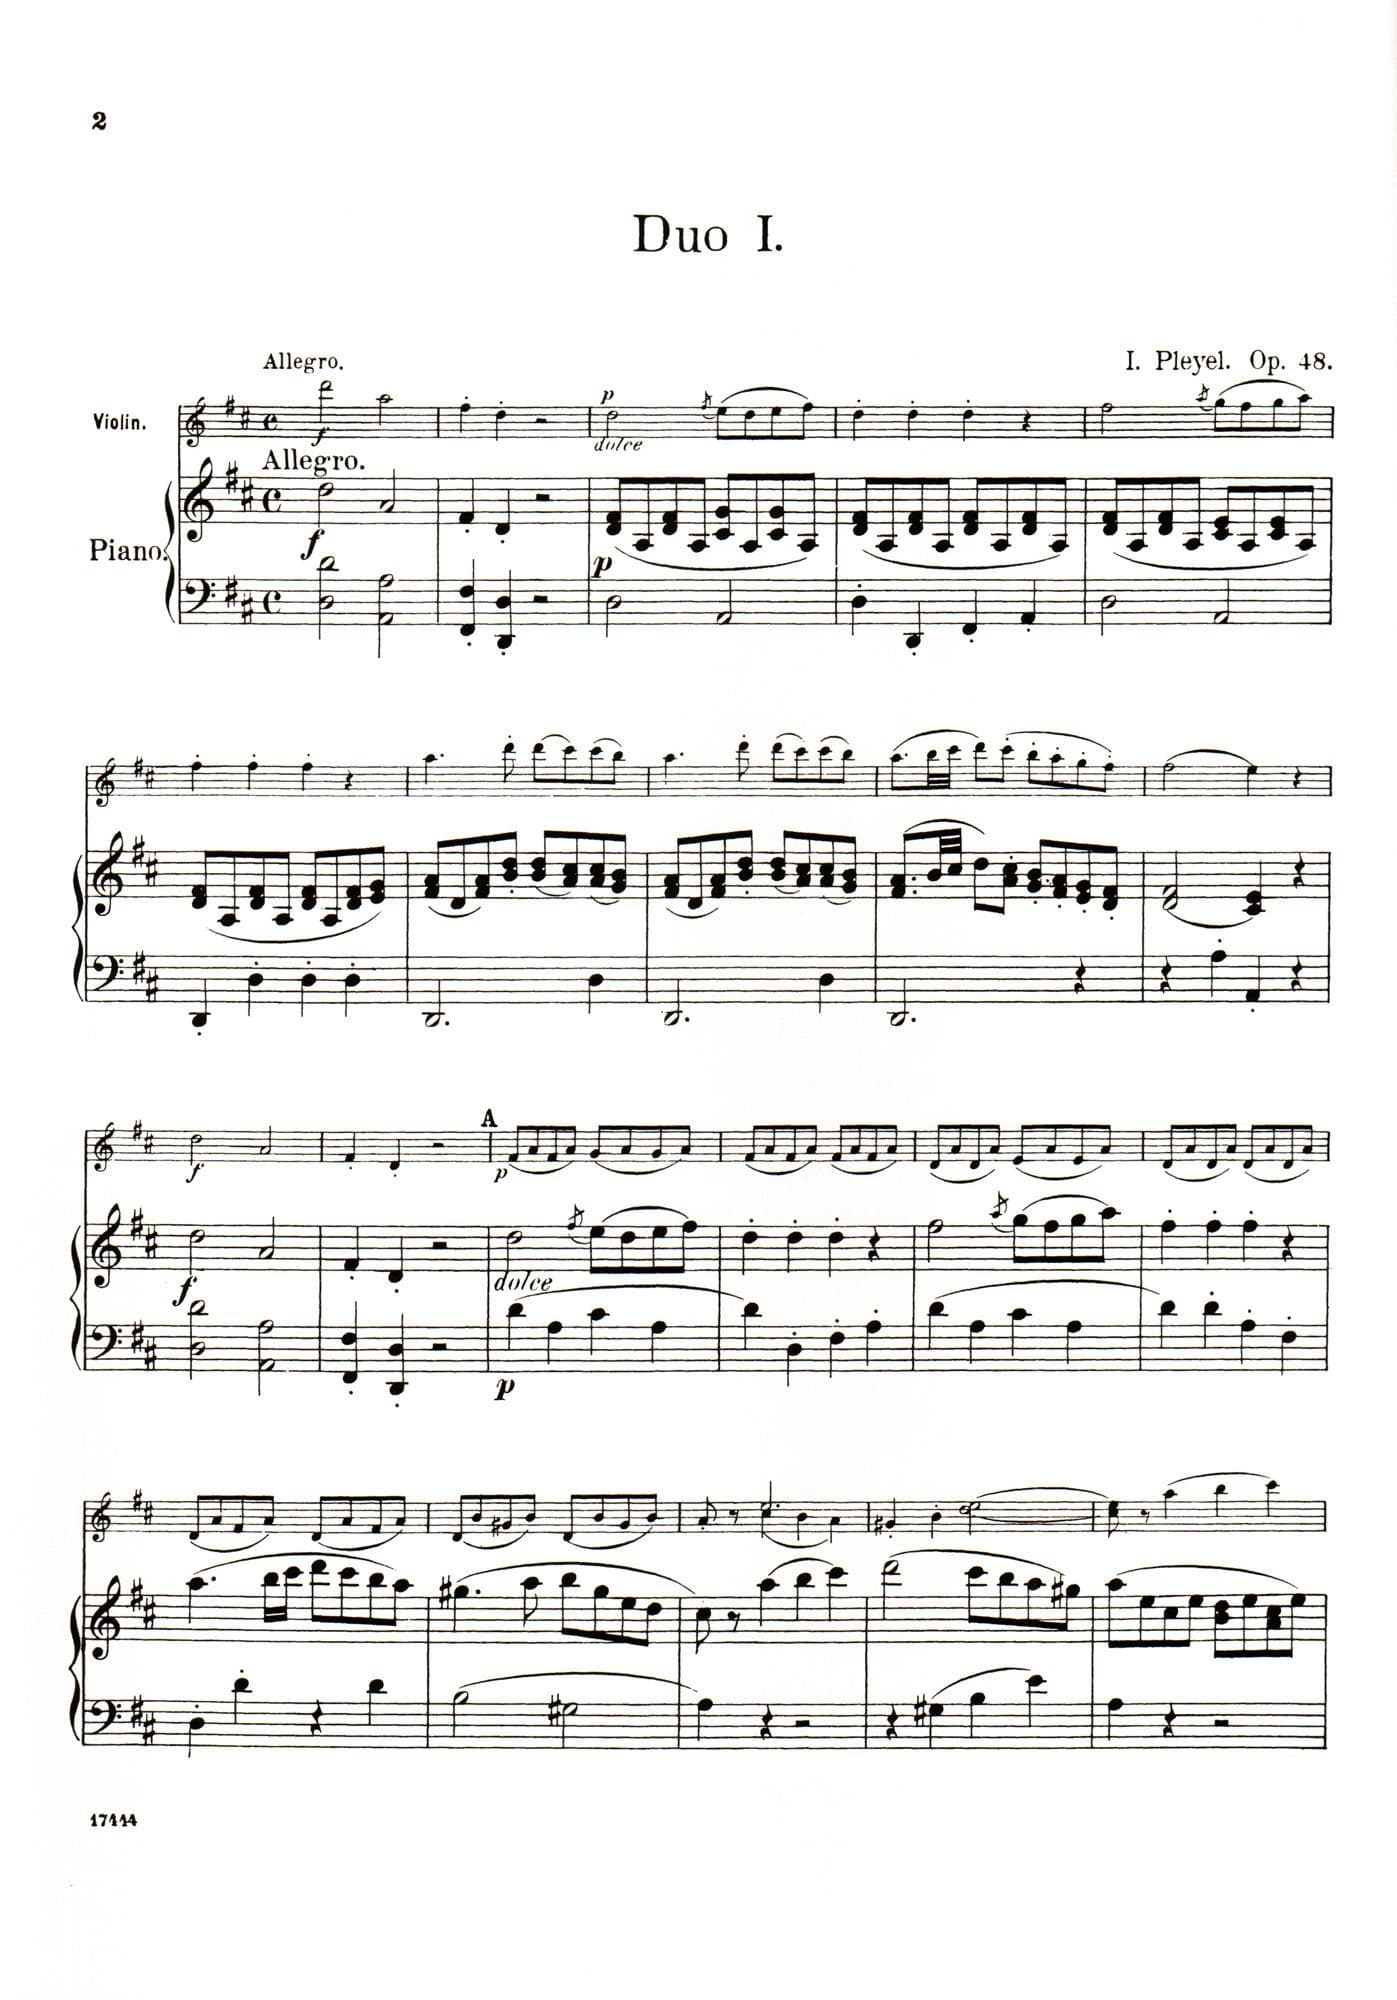 Pleyel, Ignace Joseph - Six Little Duets, Op 48, B 574-579 For Two Violins Published by G Schirmer